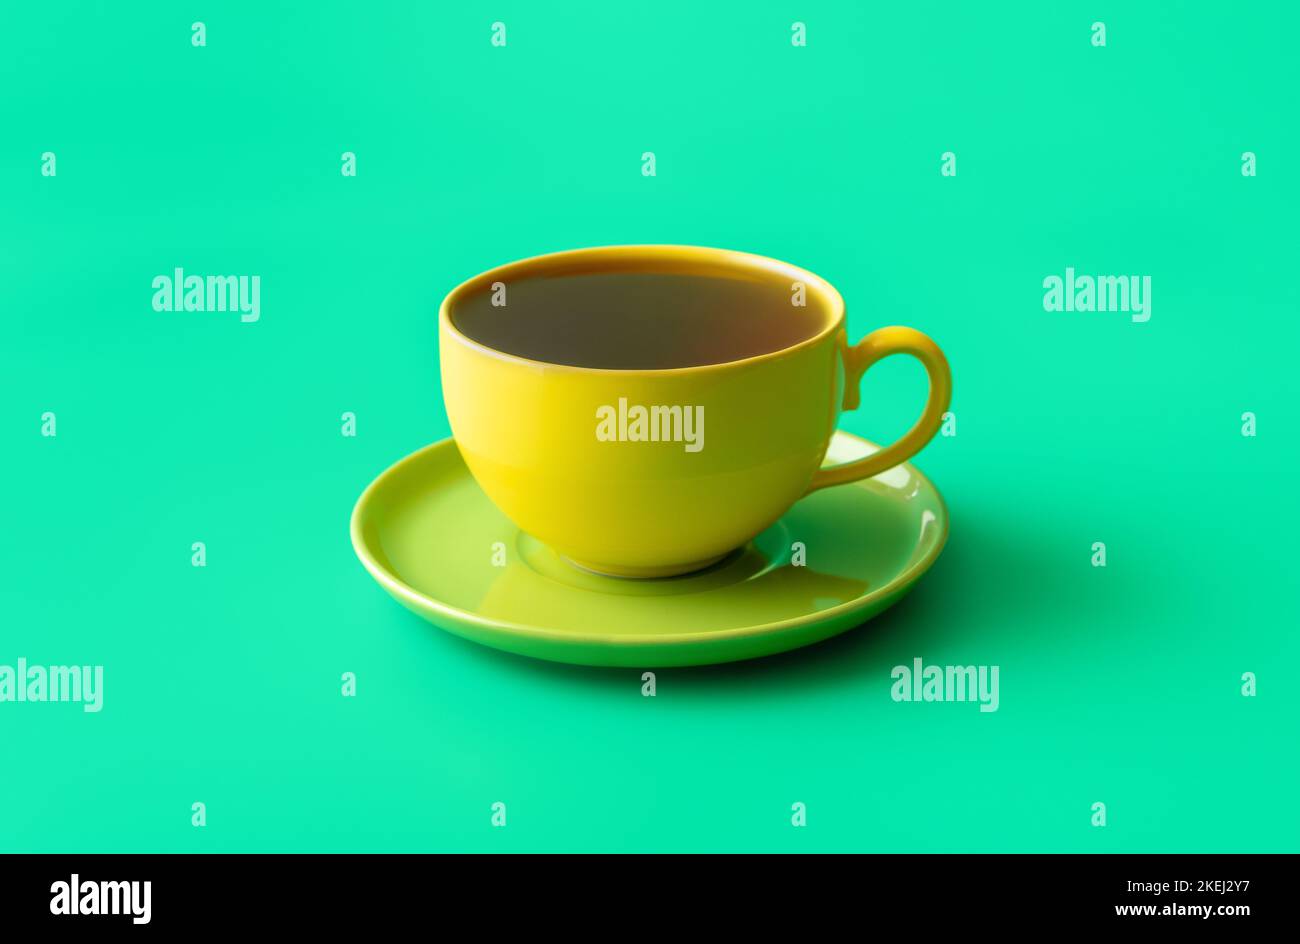 Close-up with a single cup of tea minimalist on a green colored table. Healthy hot drink, mint tea in a ceramic yellow cup Stock Photo